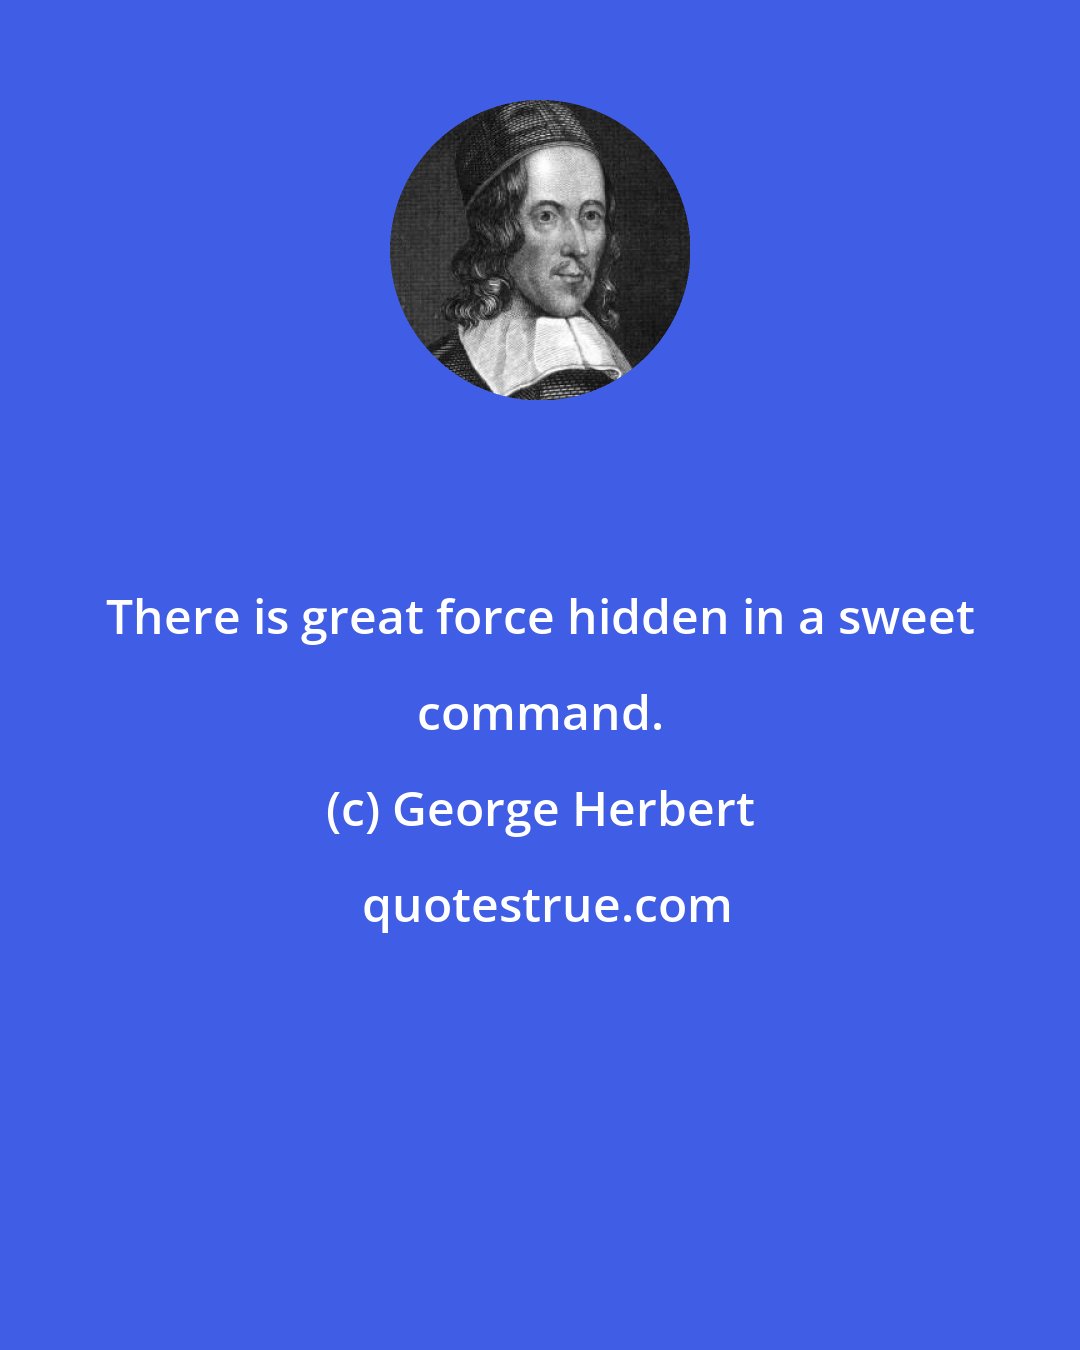 George Herbert: There is great force hidden in a sweet command.